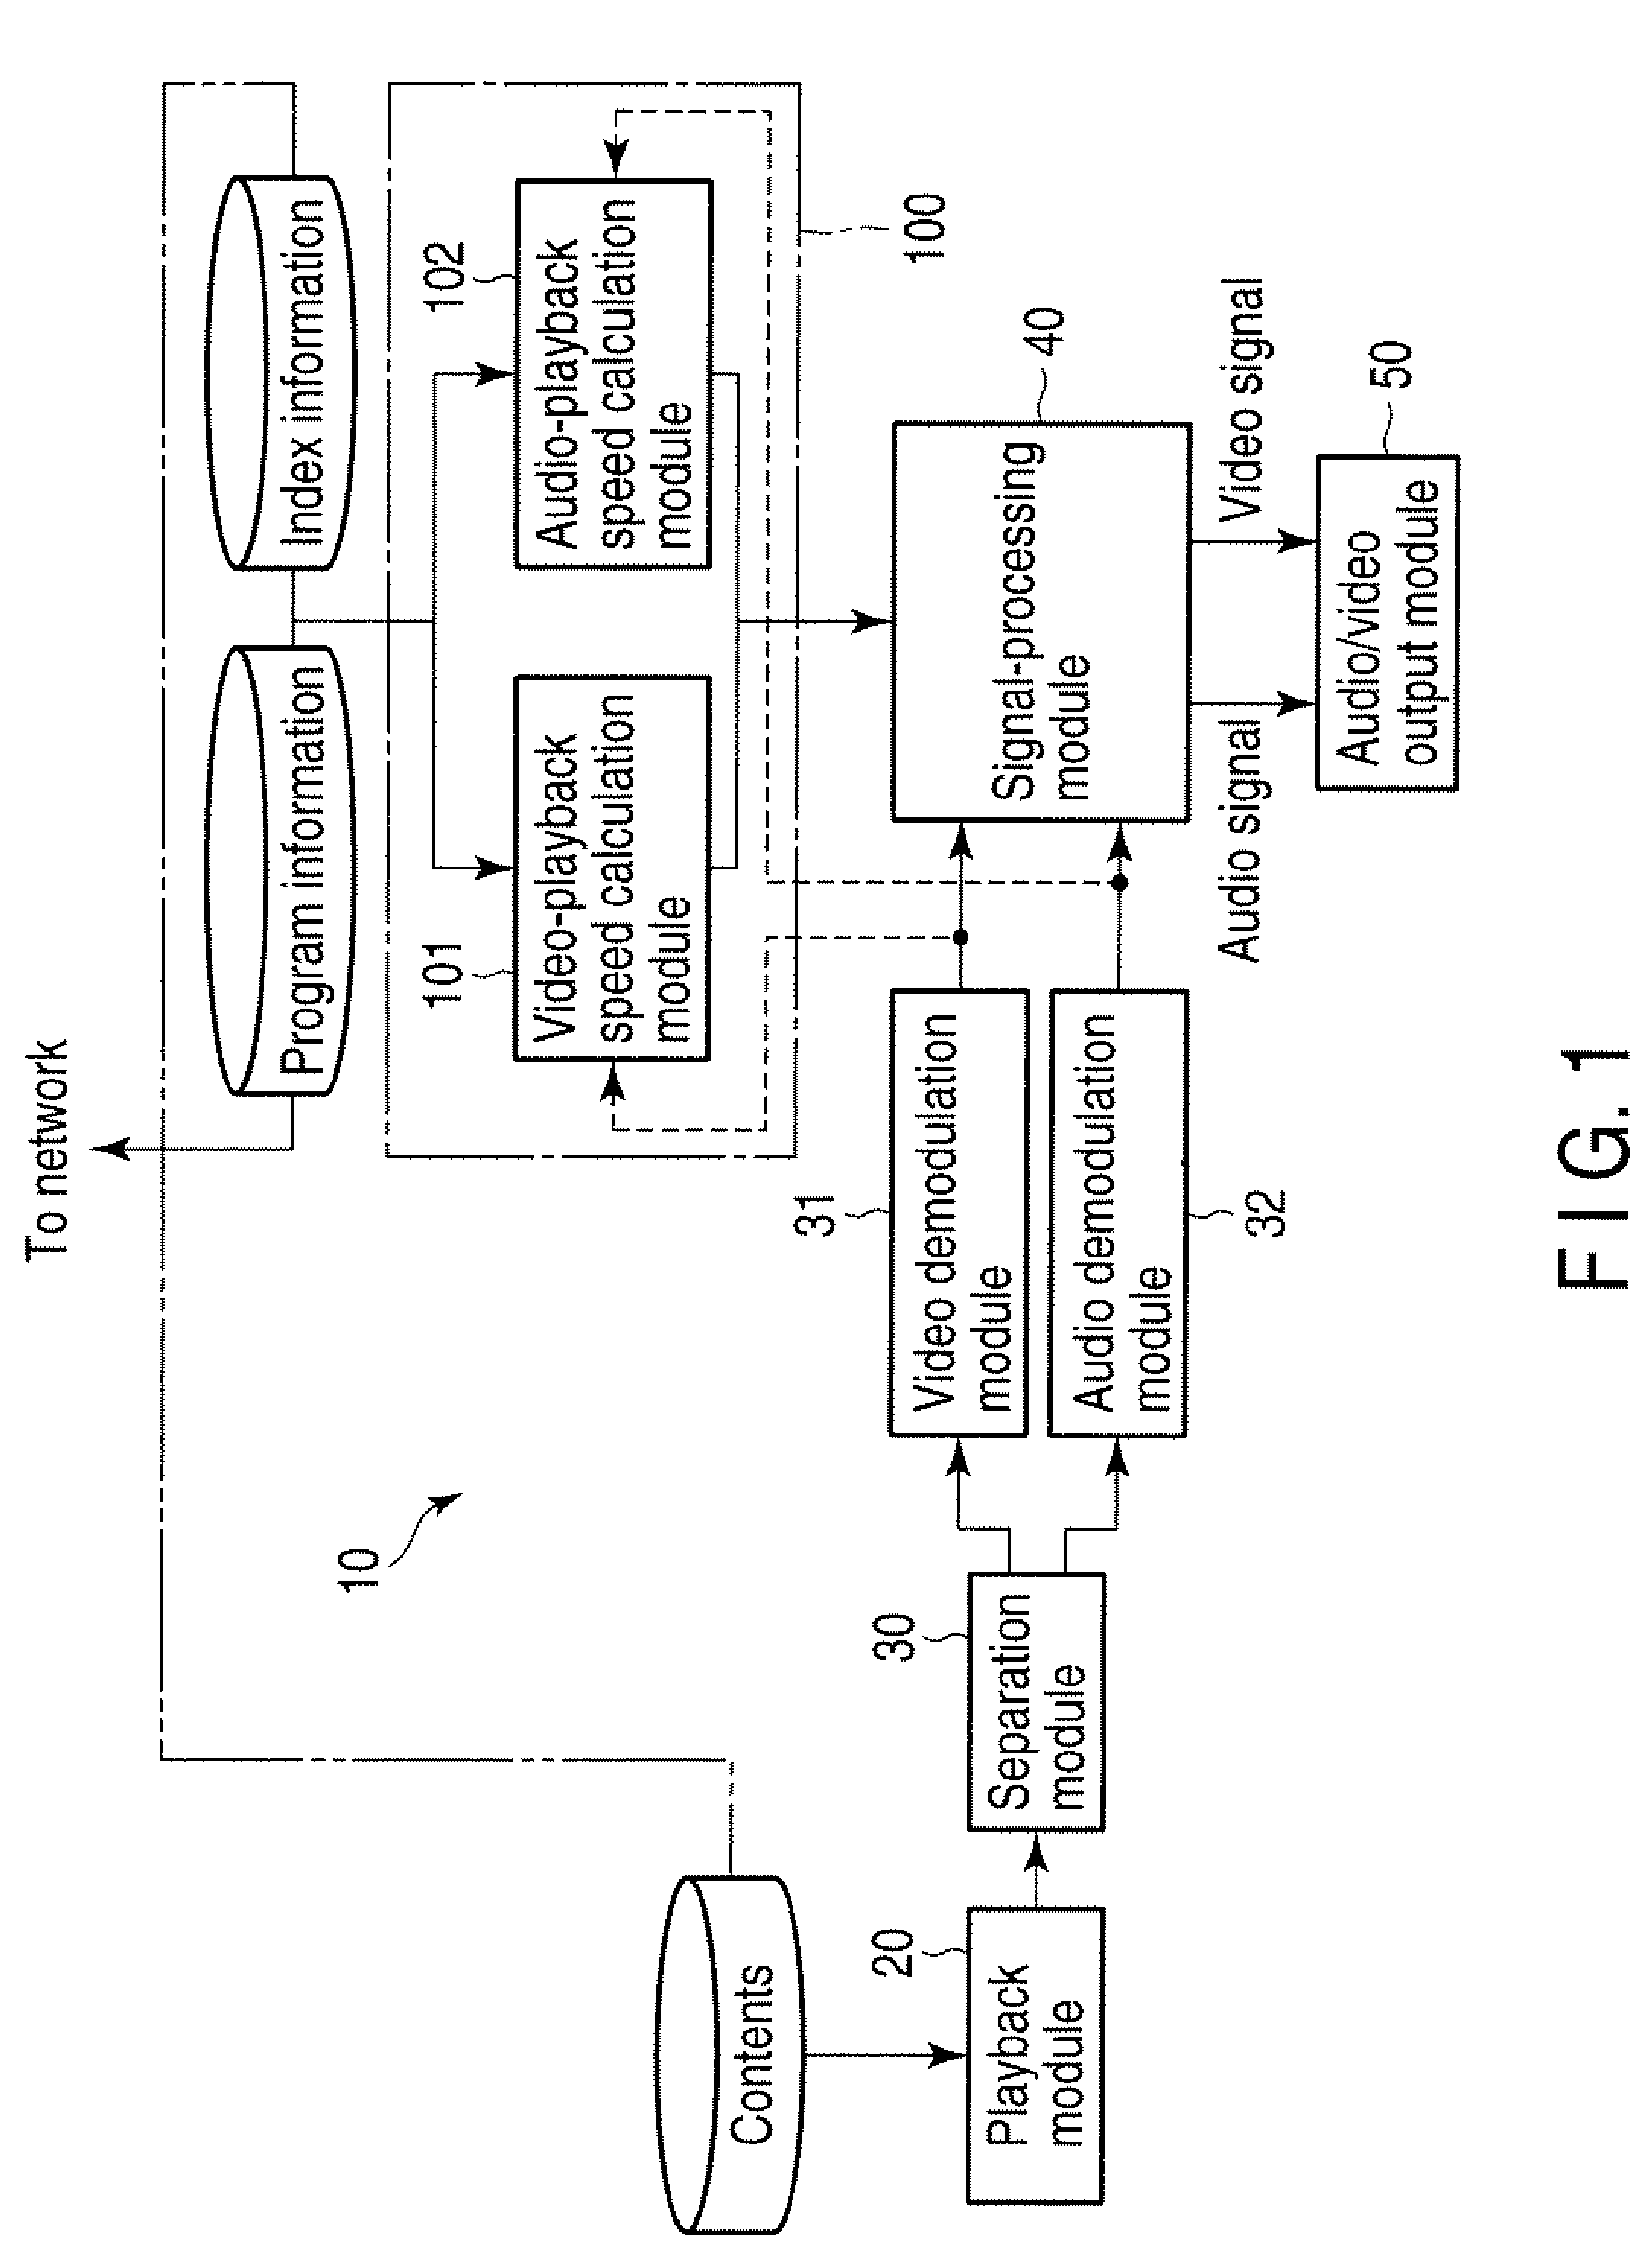 Method and apparatus for reproducing video and audio